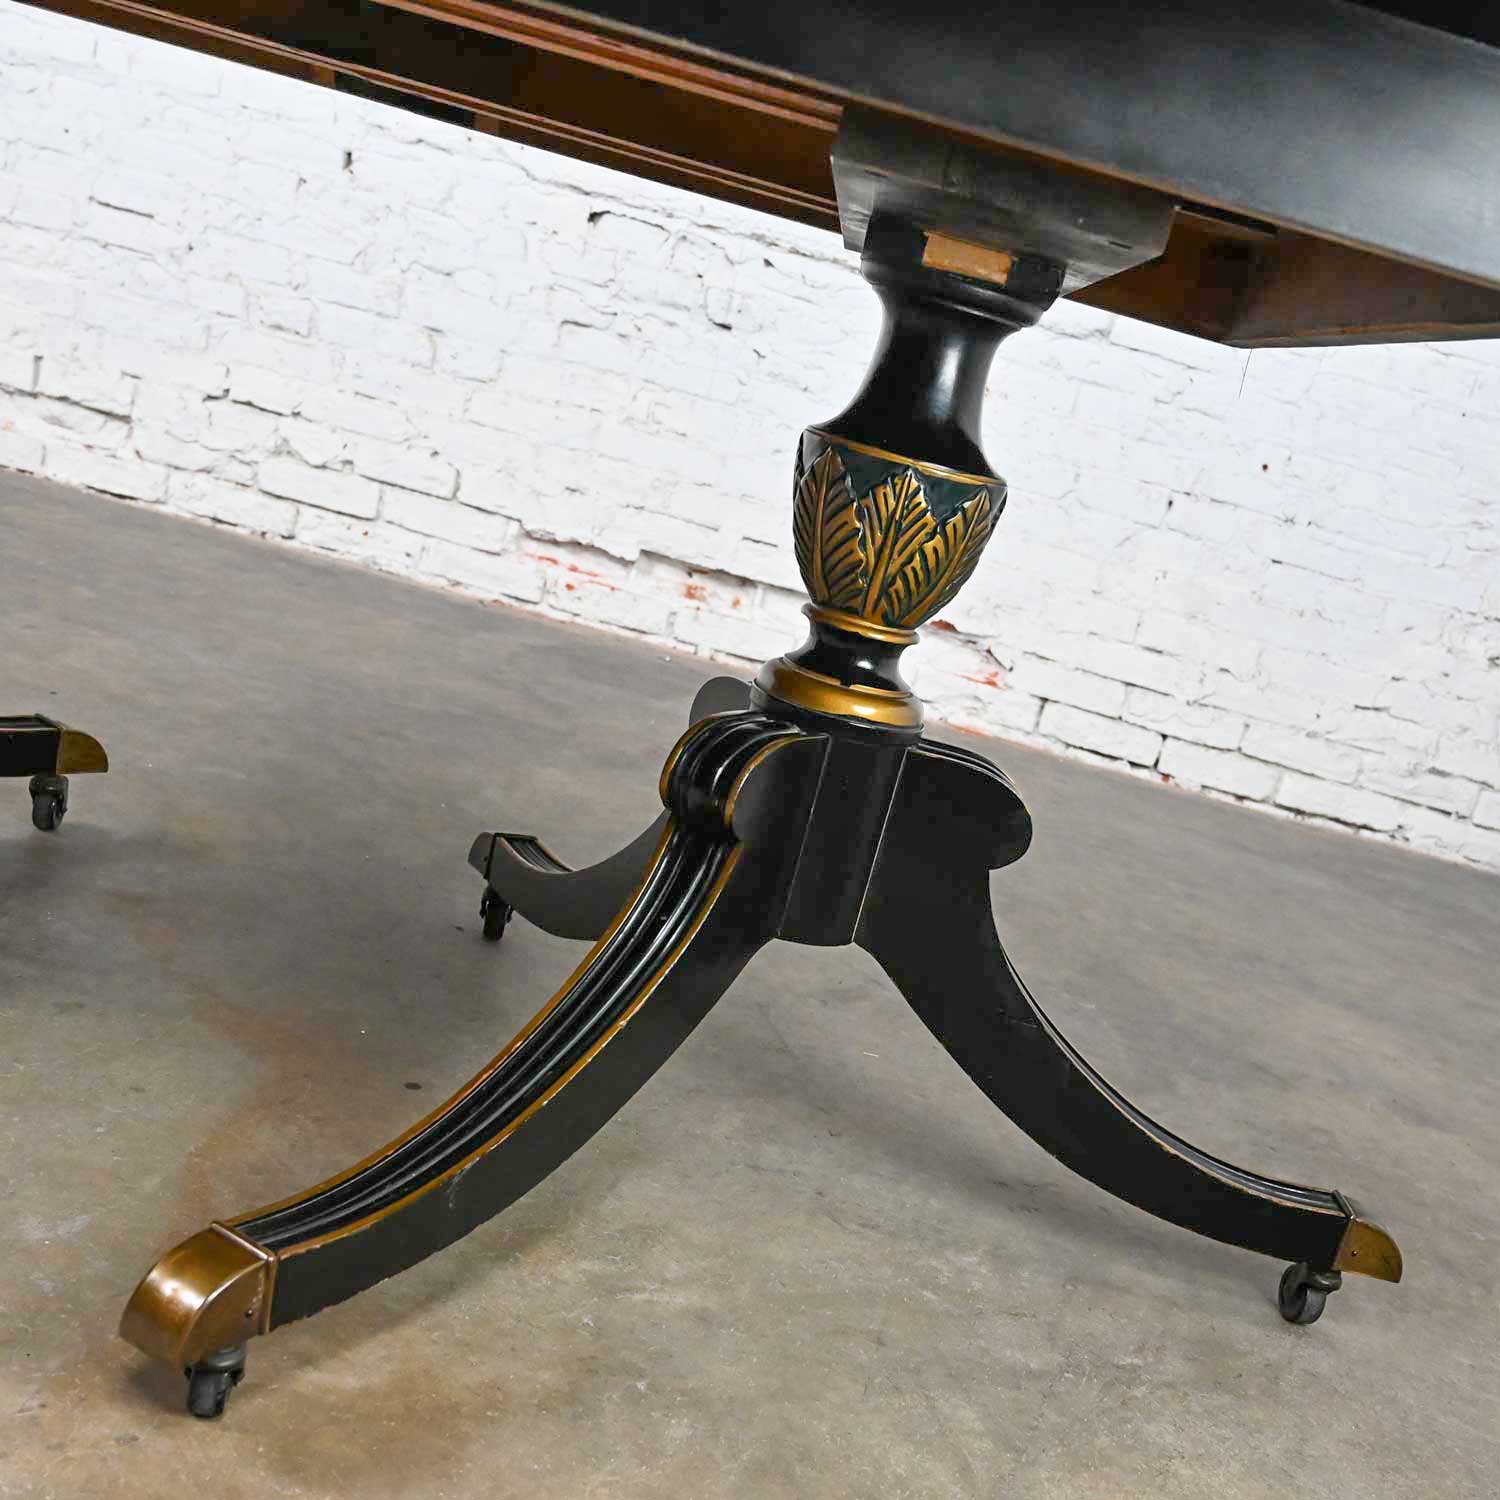 Mid-20th Century Chinoiserie Regency Style Union National Black Painted & Gilt Dining Table Double Tripod Base